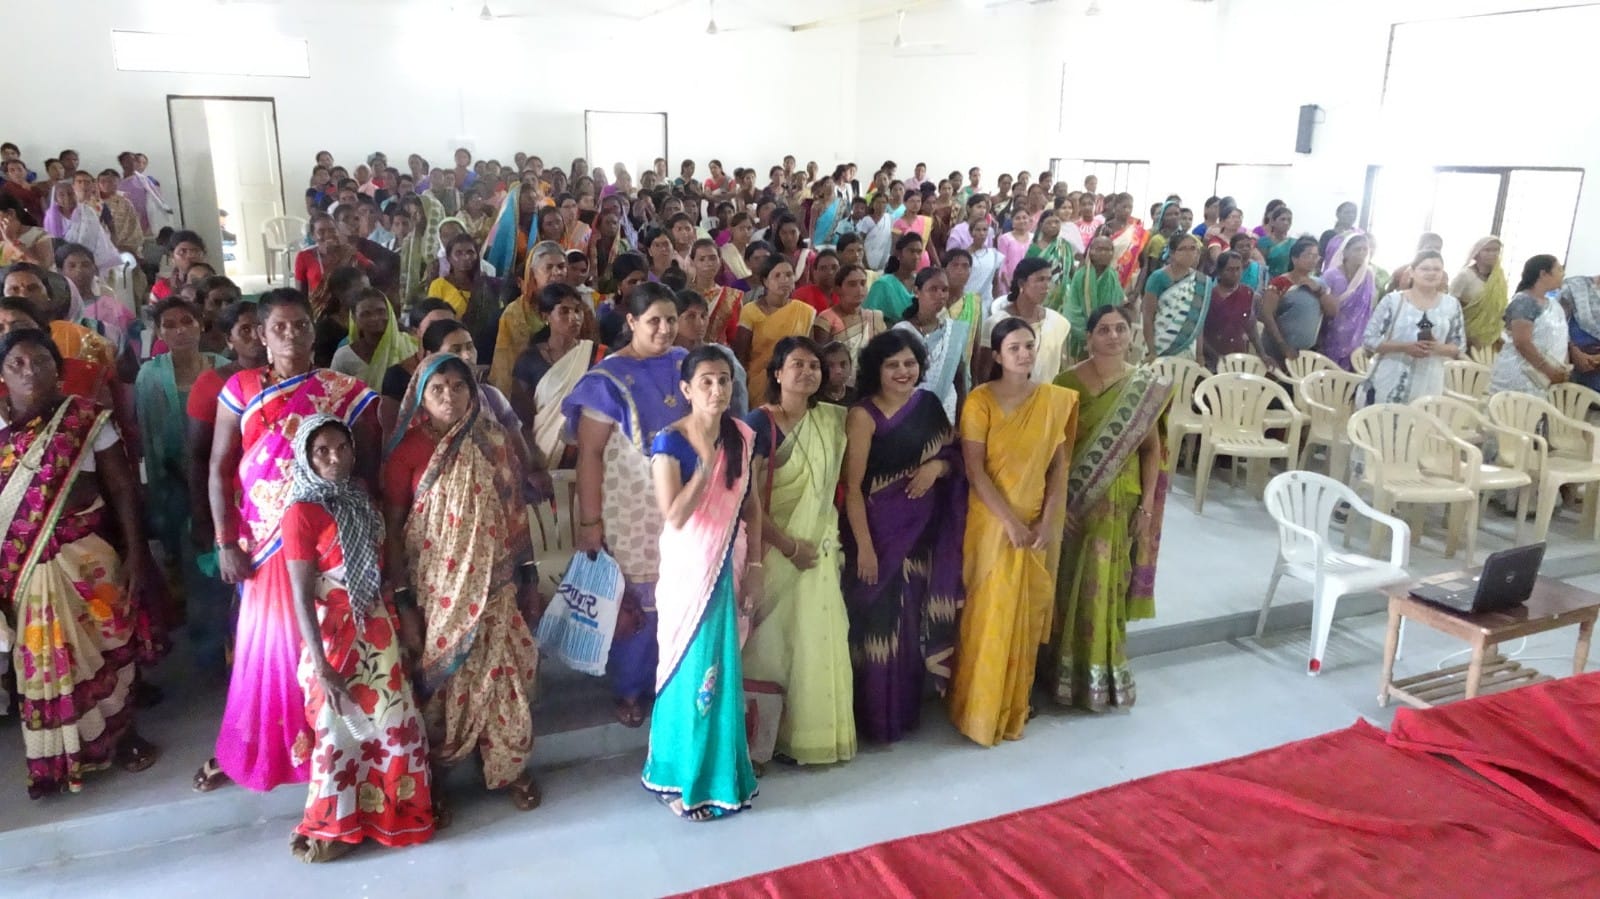 Dr. Ghumare seen here with over 600 women. As part of health camp, Save Indian Farmers had organized speech by Dr. Ghumare, health checkup as well as distribution of essential medicines for women in need.